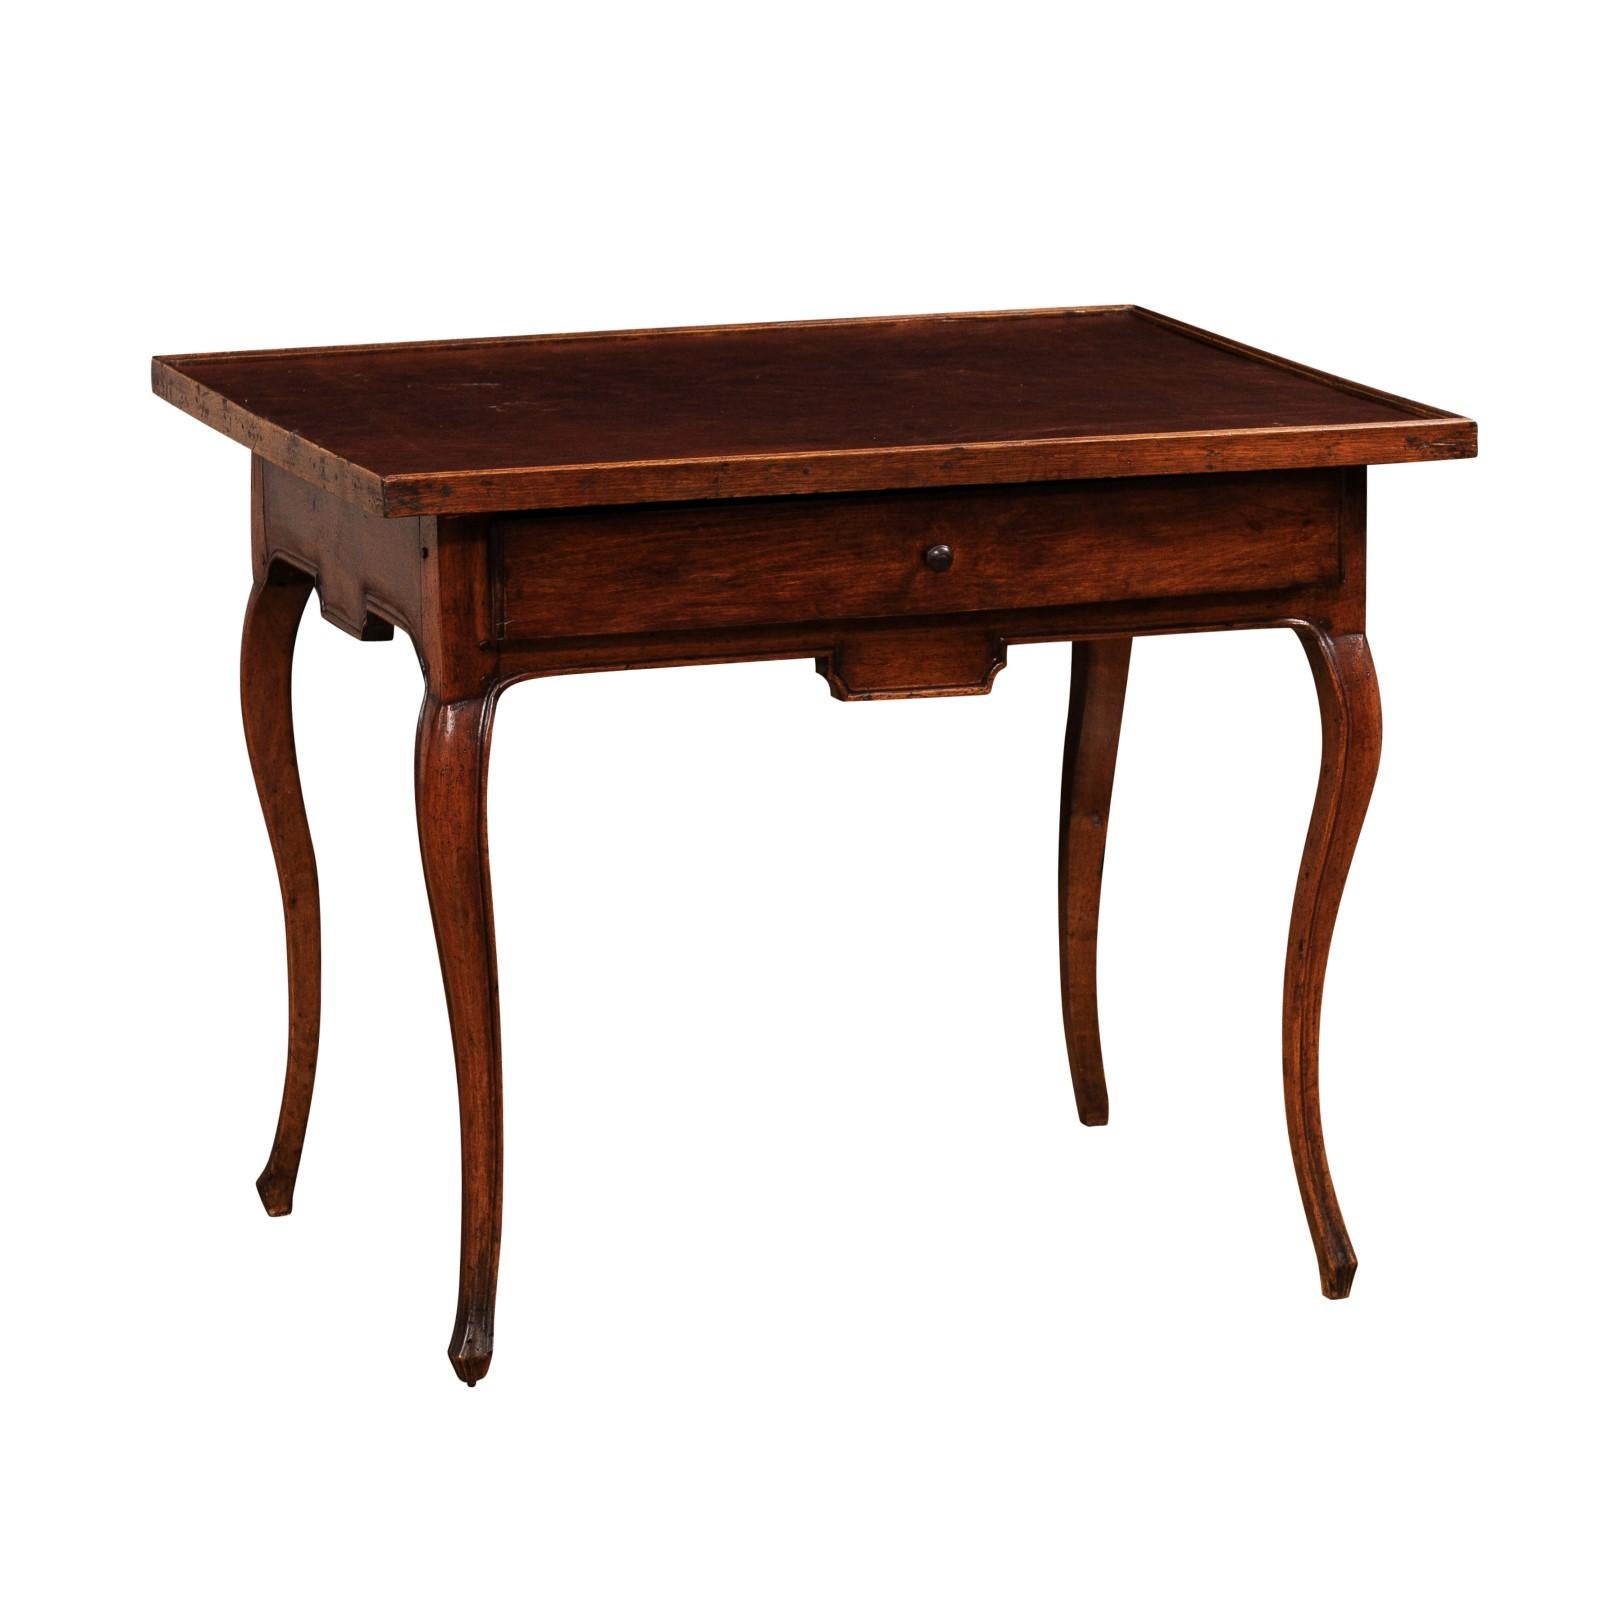 A French Louis XV period game table from the 18th century with brown leather top, single drawer, carved apron and cabriole legs. This exquisite French Louis XV period game table, crafted in the 18th century, is a testament to the timeless allure of